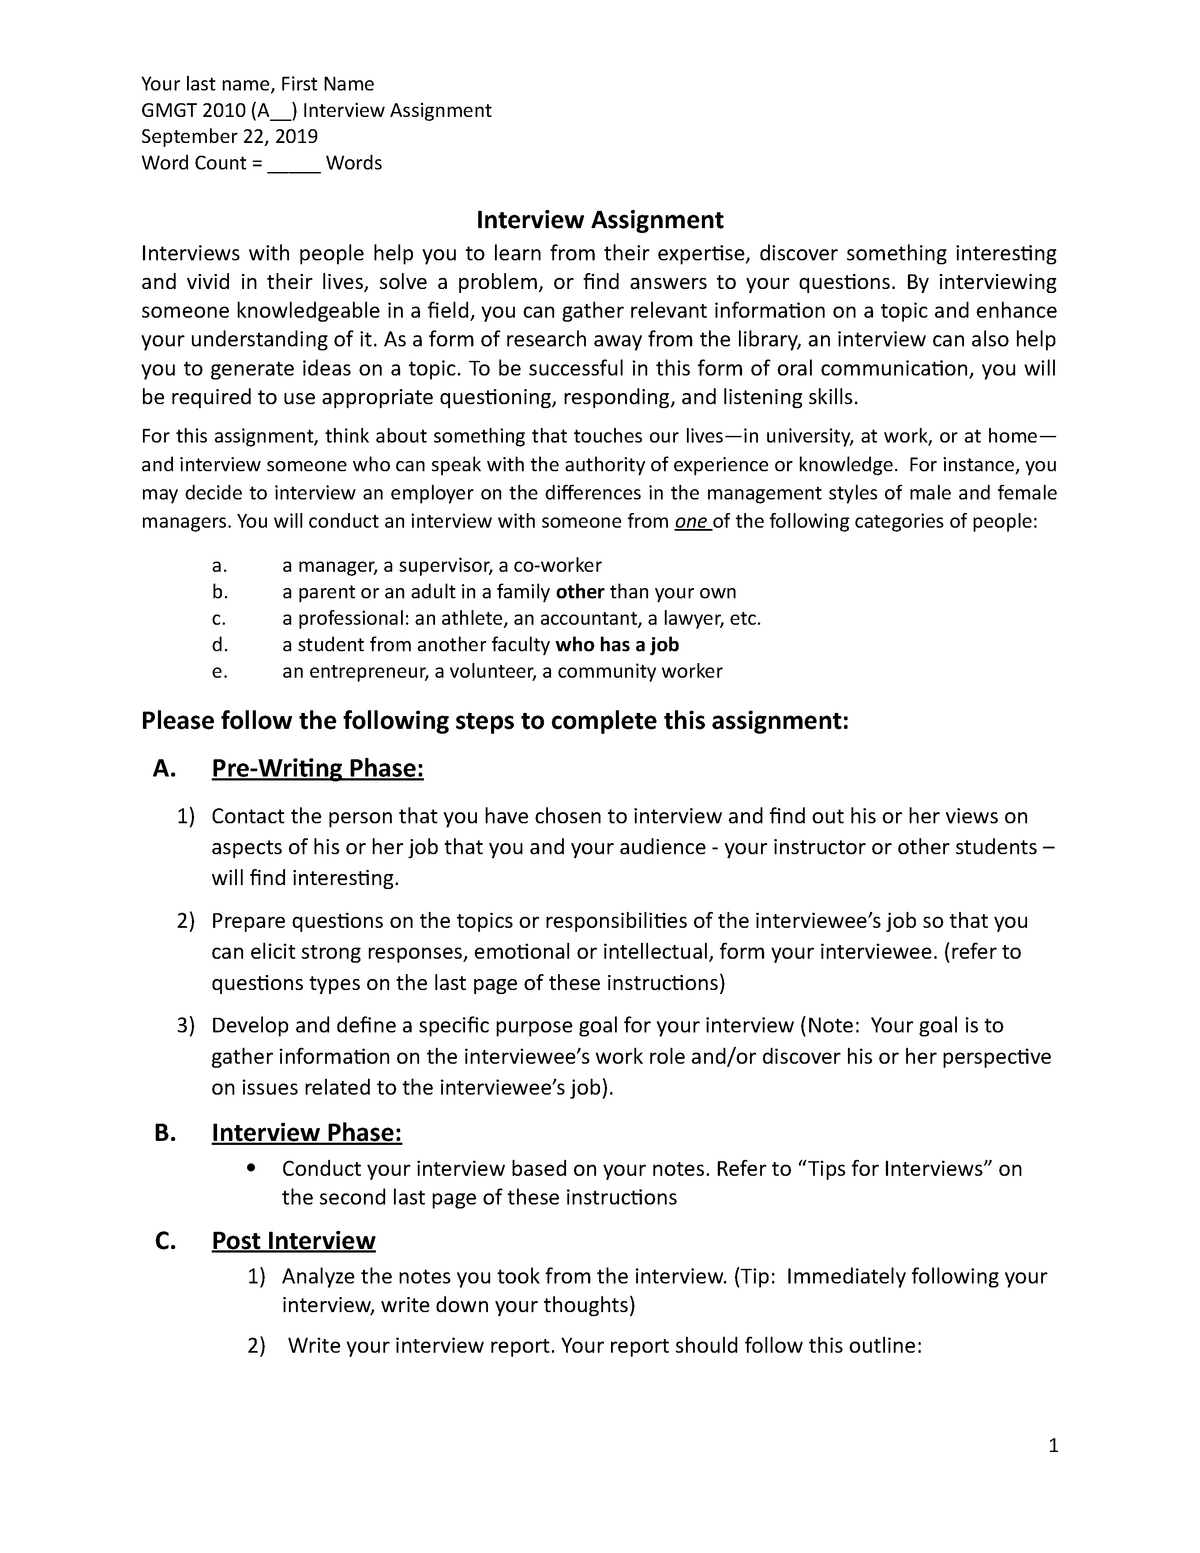 job interview assignment for students